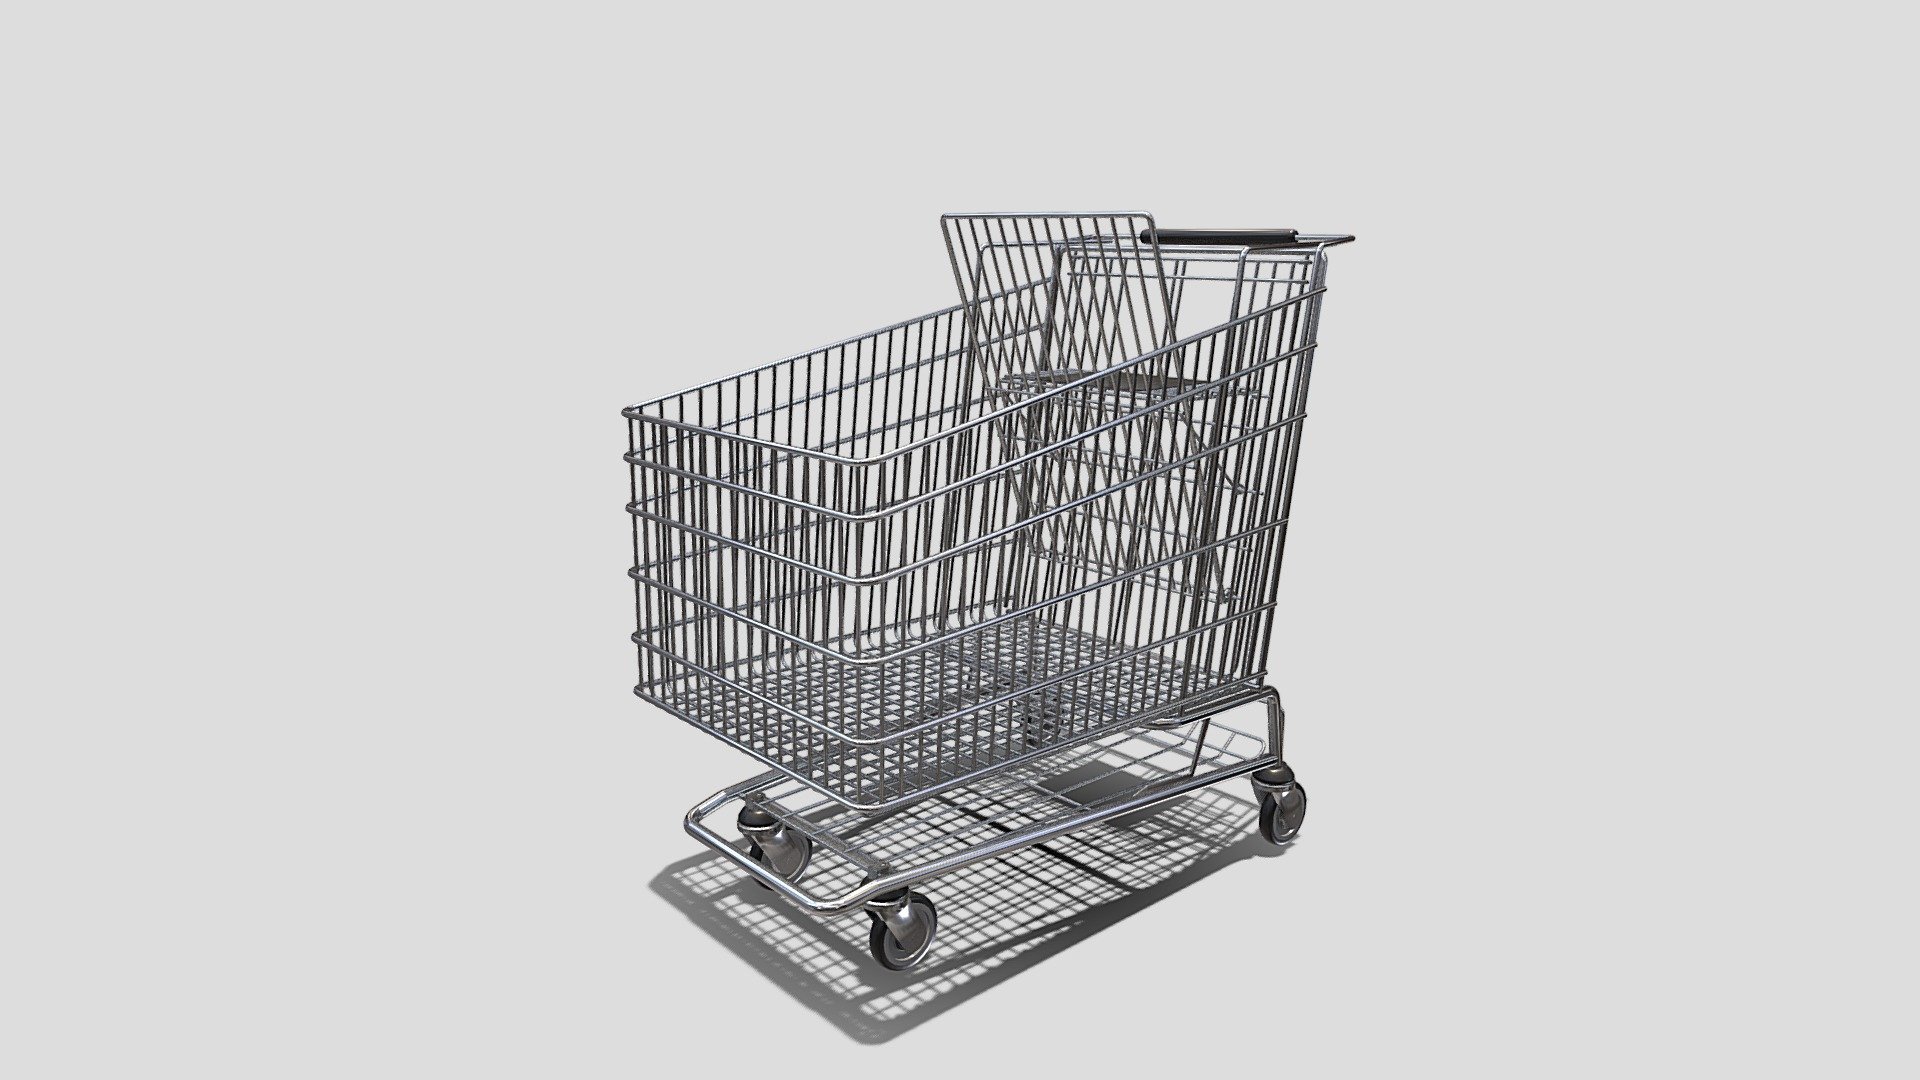 Shopping cart 3d model rendered with Cycles in Blender, as per seen on attached images. 
The model is scaled to real-life scale.

File formats:
-.blend, rendered with cycles, as seen in the images;
-.obj, with materials applied;
-.dae, with materials applied;
-.fbx, with materials applied;
-.stl;

3D Software:
The 3D model was originally created in Blender 3.1 and rendered with Cycles.

Materials and textures:
The models have materials applied in all formats, and are ready to import and render.
Materials are image based using PBR, the model comes with five 4k png image textures.

Preview scenes:
The preview images are rendered in Blender using its built-in render engine &lsquo;Cycles'.
Note that the blend files come directly with the rendering scene included and the render command will generate the exact result as seen in previews.
Scene elements are on a different layer from the actual model for easier manipulation of objects.

For any problems please feel free to contact me.

Don't forget to rate and enjoy! - Shopping cart v5 - Buy Royalty Free 3D model by dragosburian 3d model